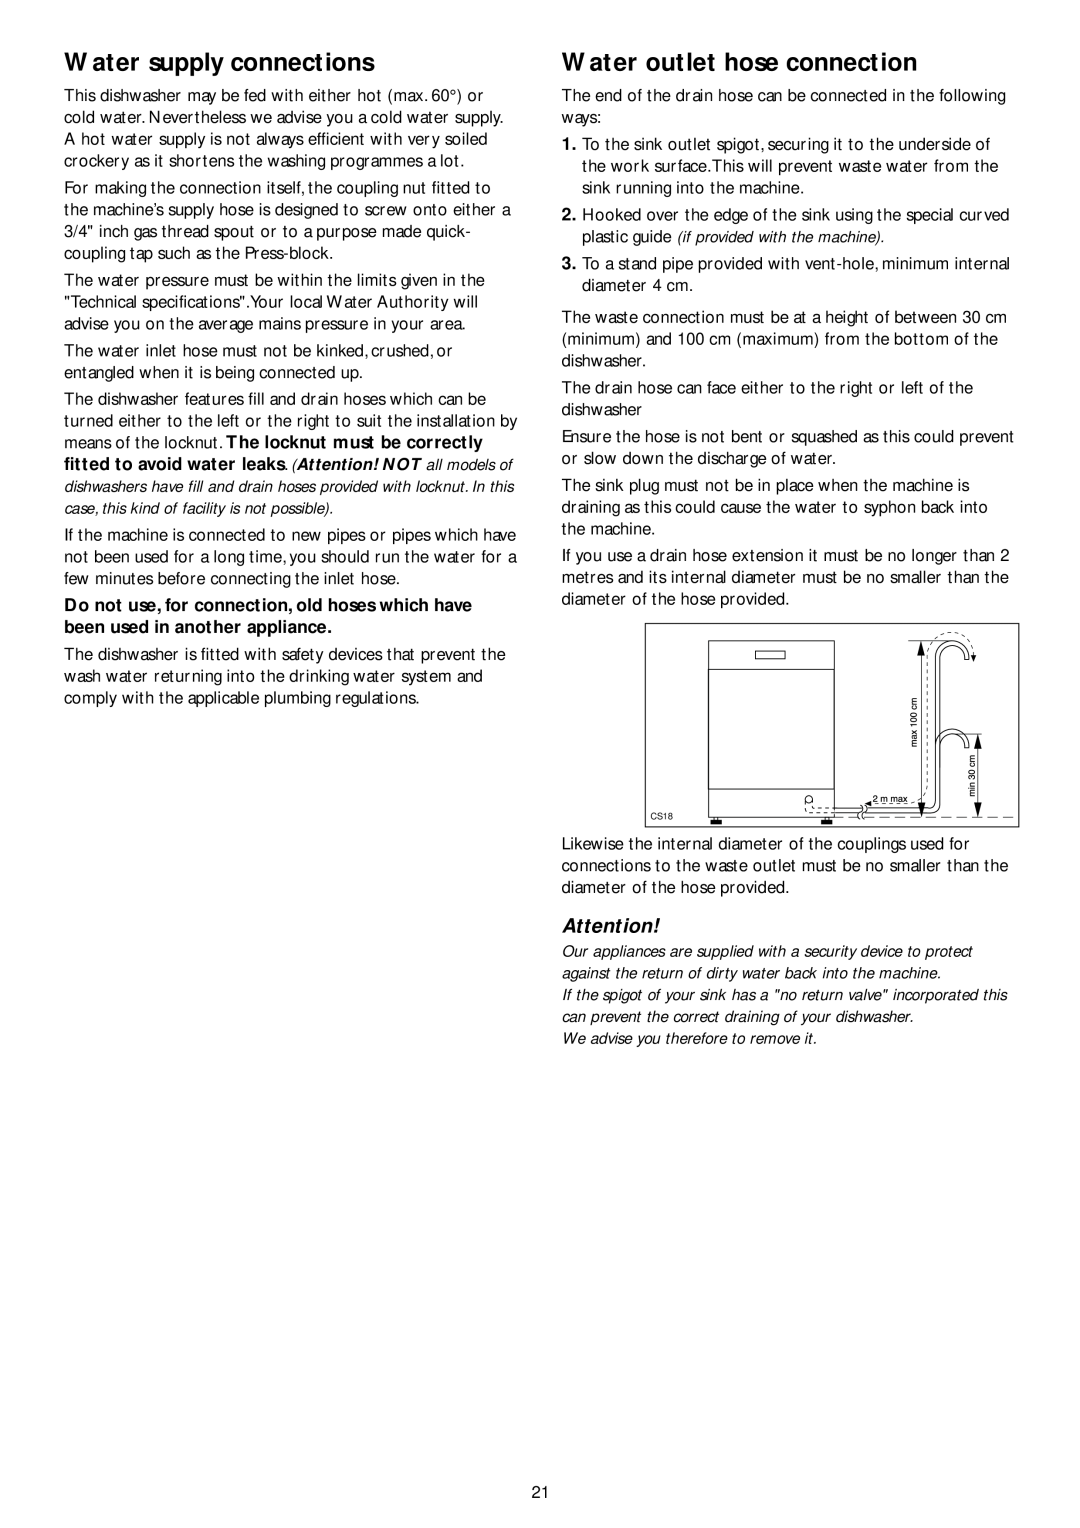 John Lewis JLDWW 1201 Water supply connections, Water outlet hose connection, We advise you therefore to remove it 